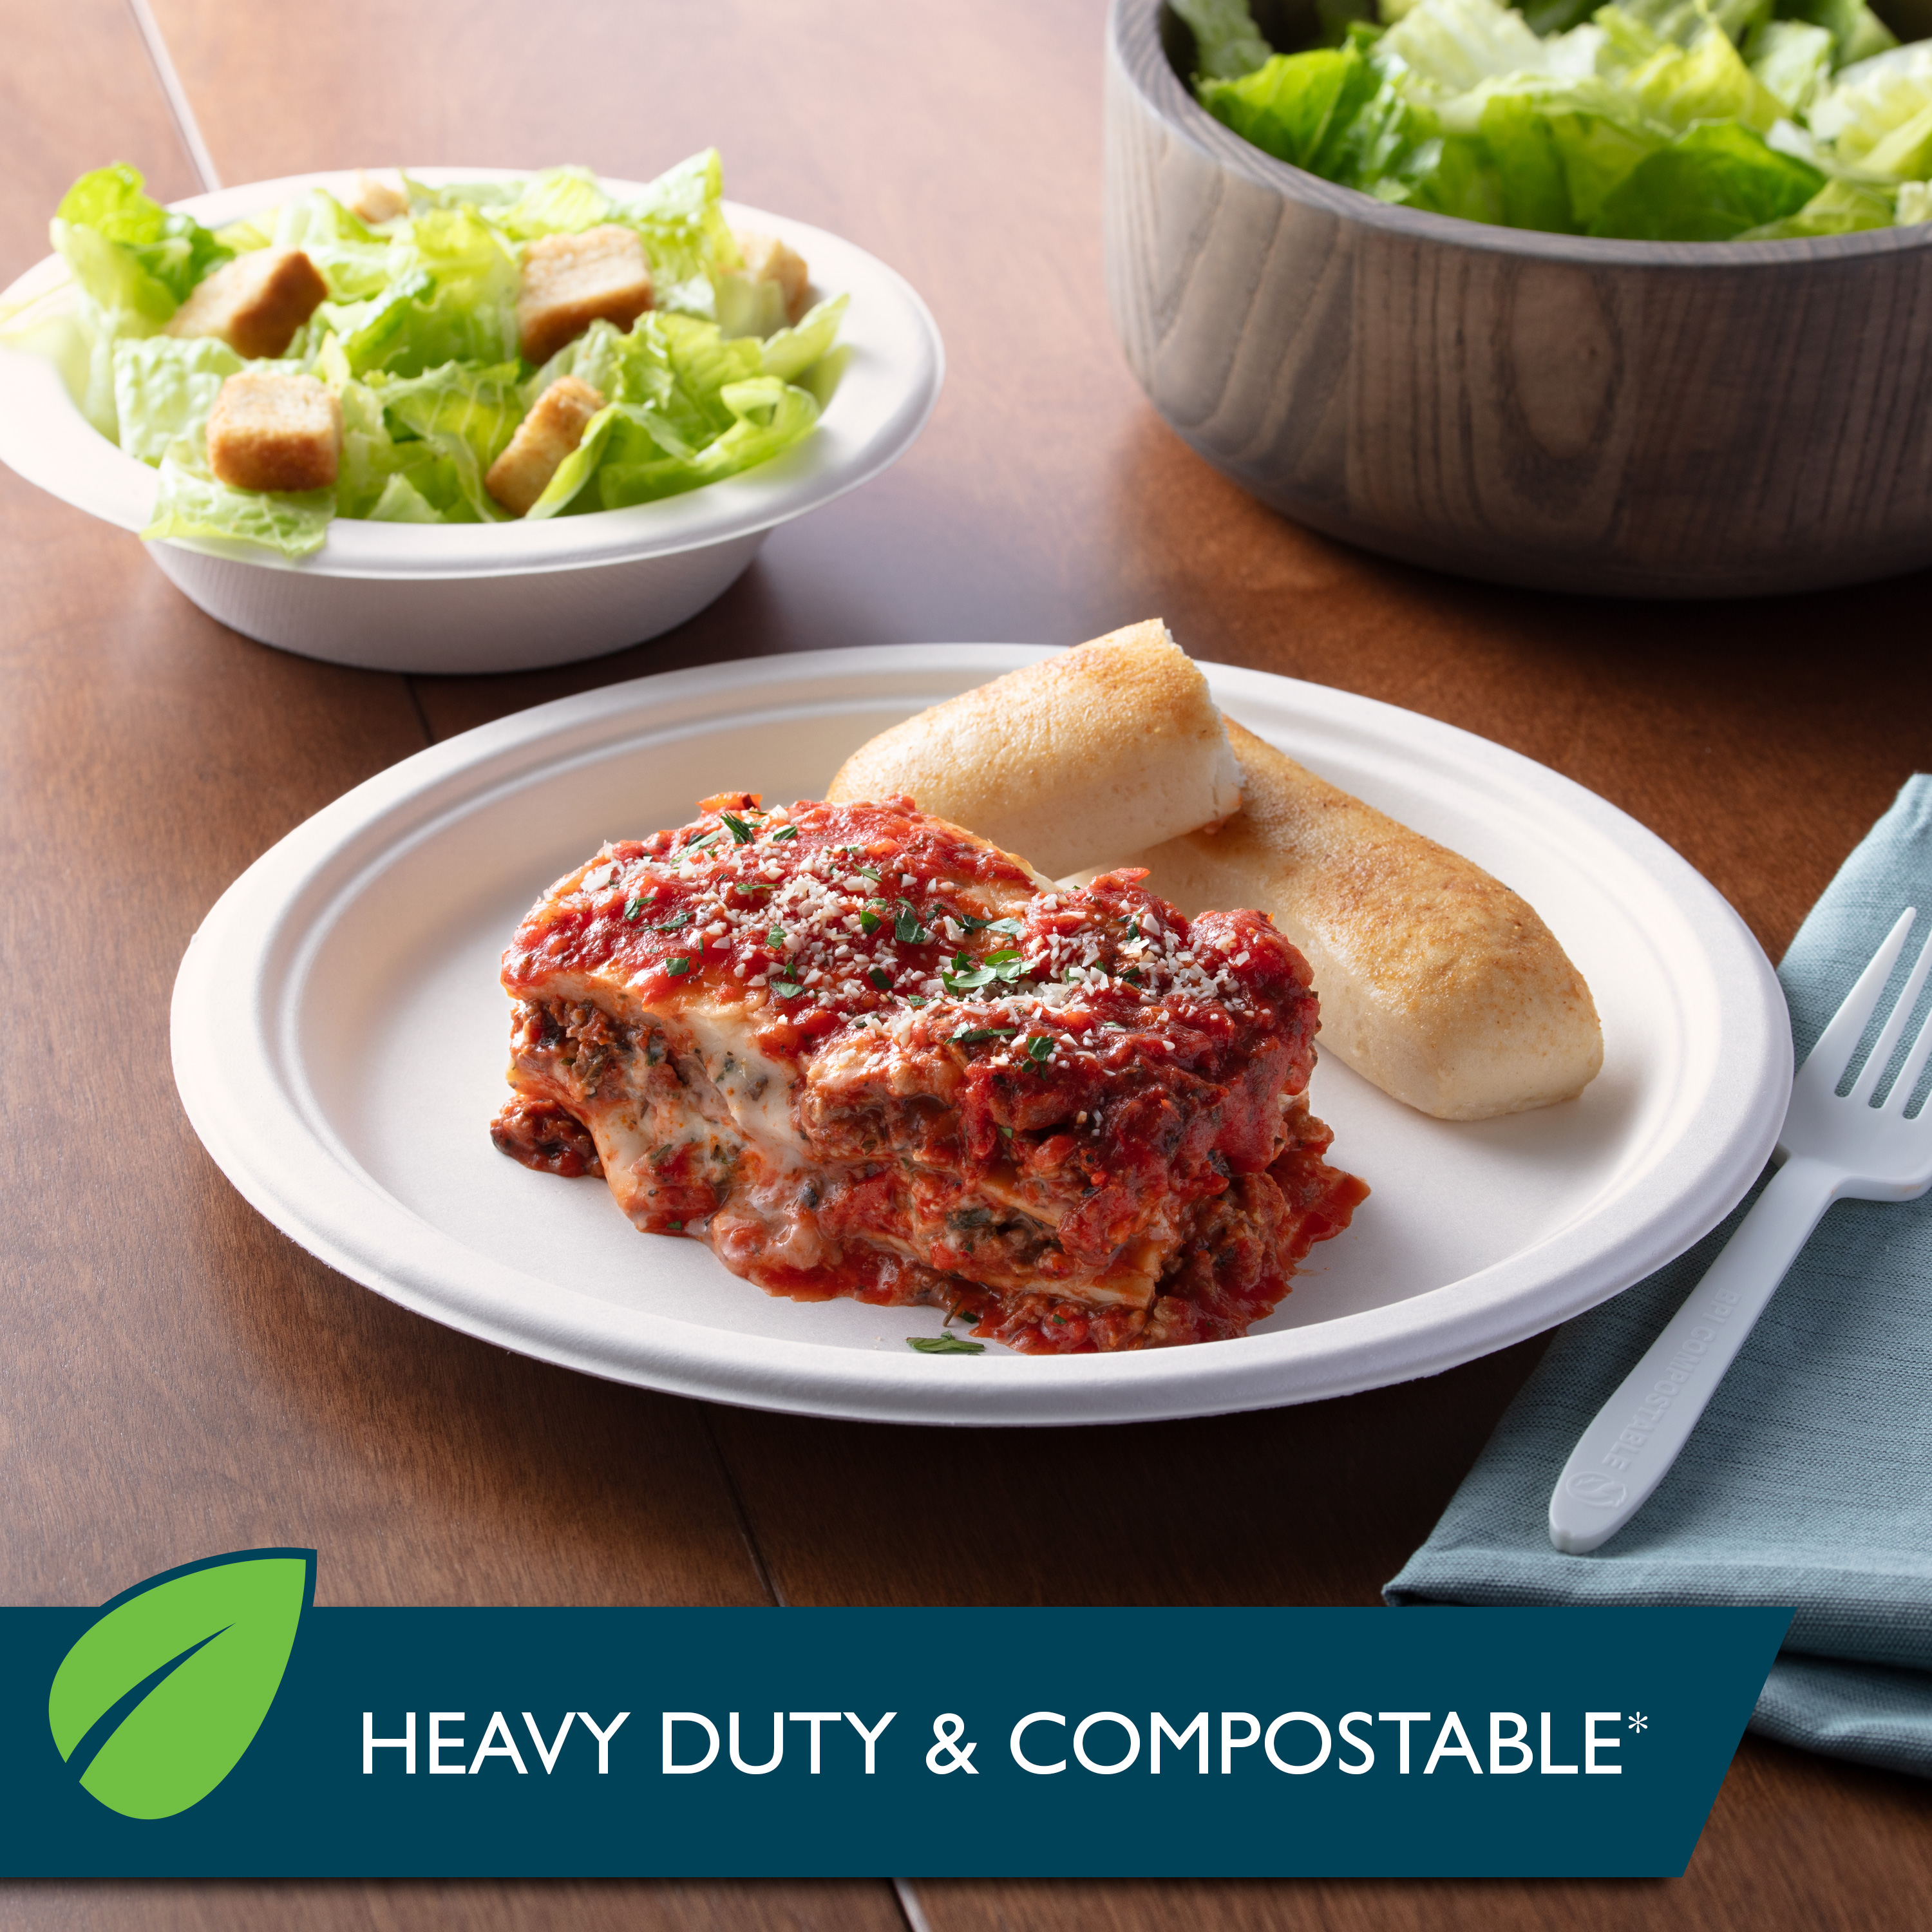 Hefty ECOSAVE Compostable Paper Plates, 10-1/8 inch, 16 Count - image 5 of 10